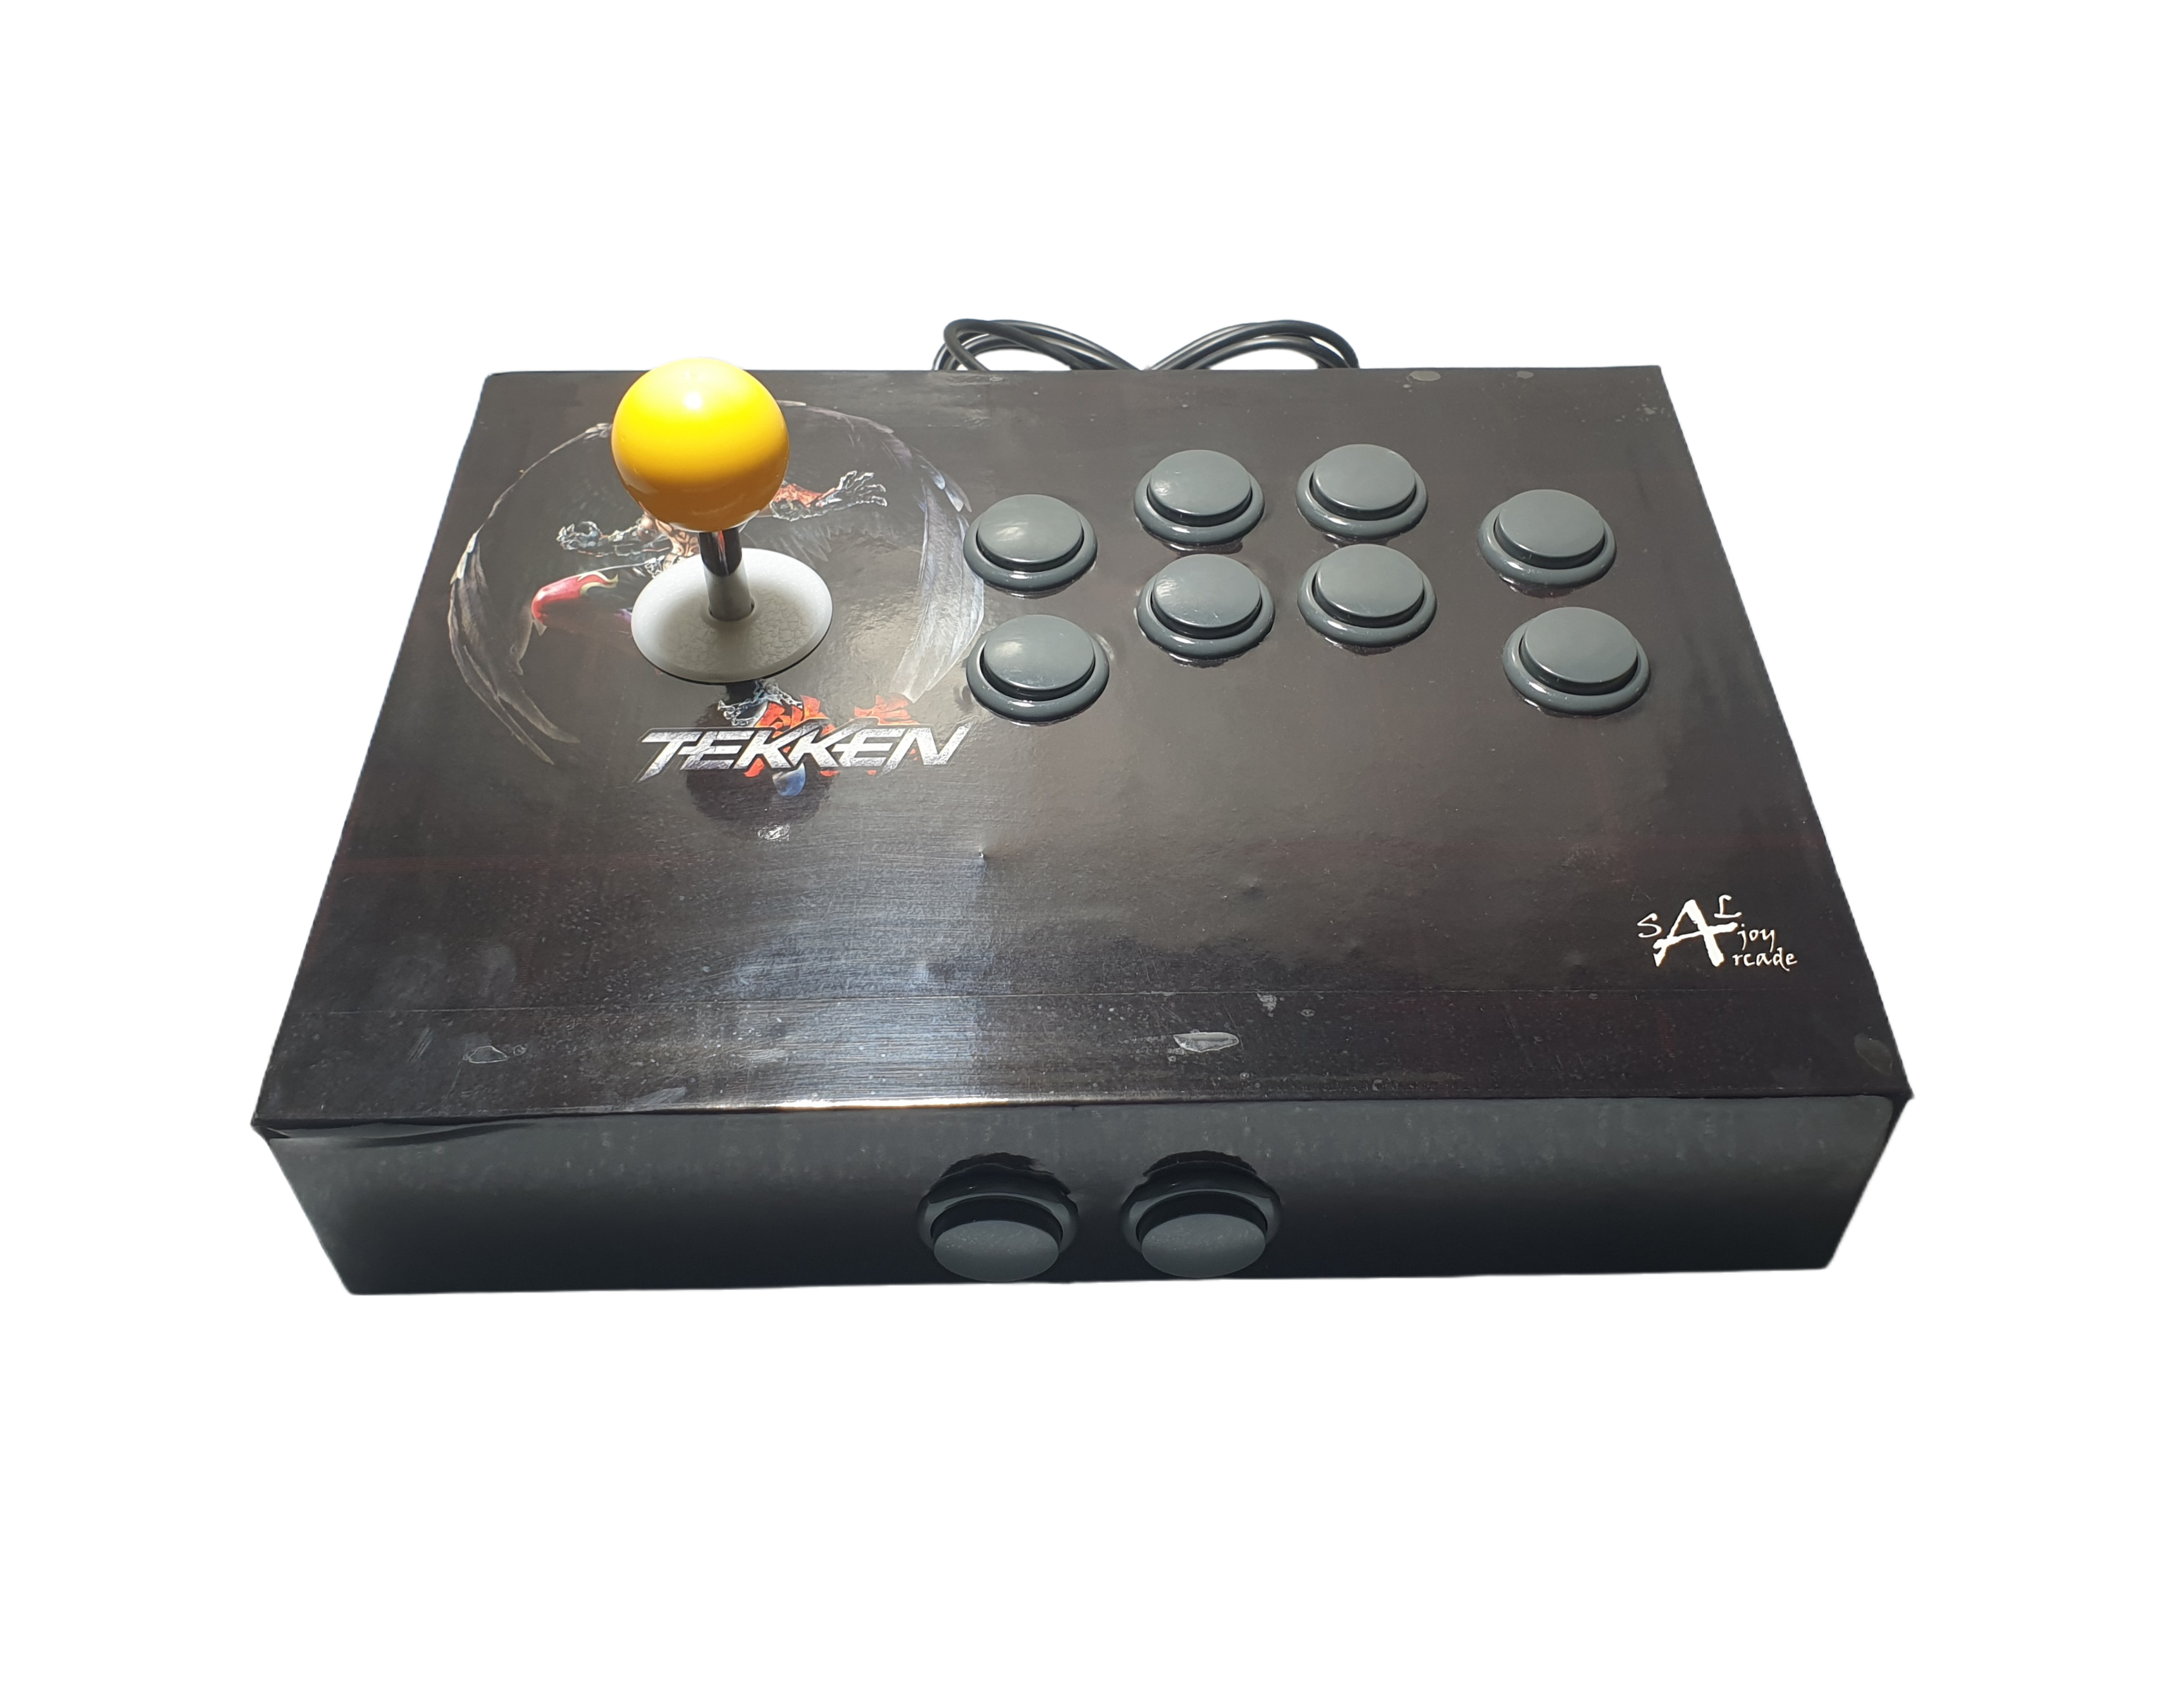 SANWA COPY PC Usb Arcade joystick Gamepad for Play station 3, Windows and Android [Model: YSTP3]